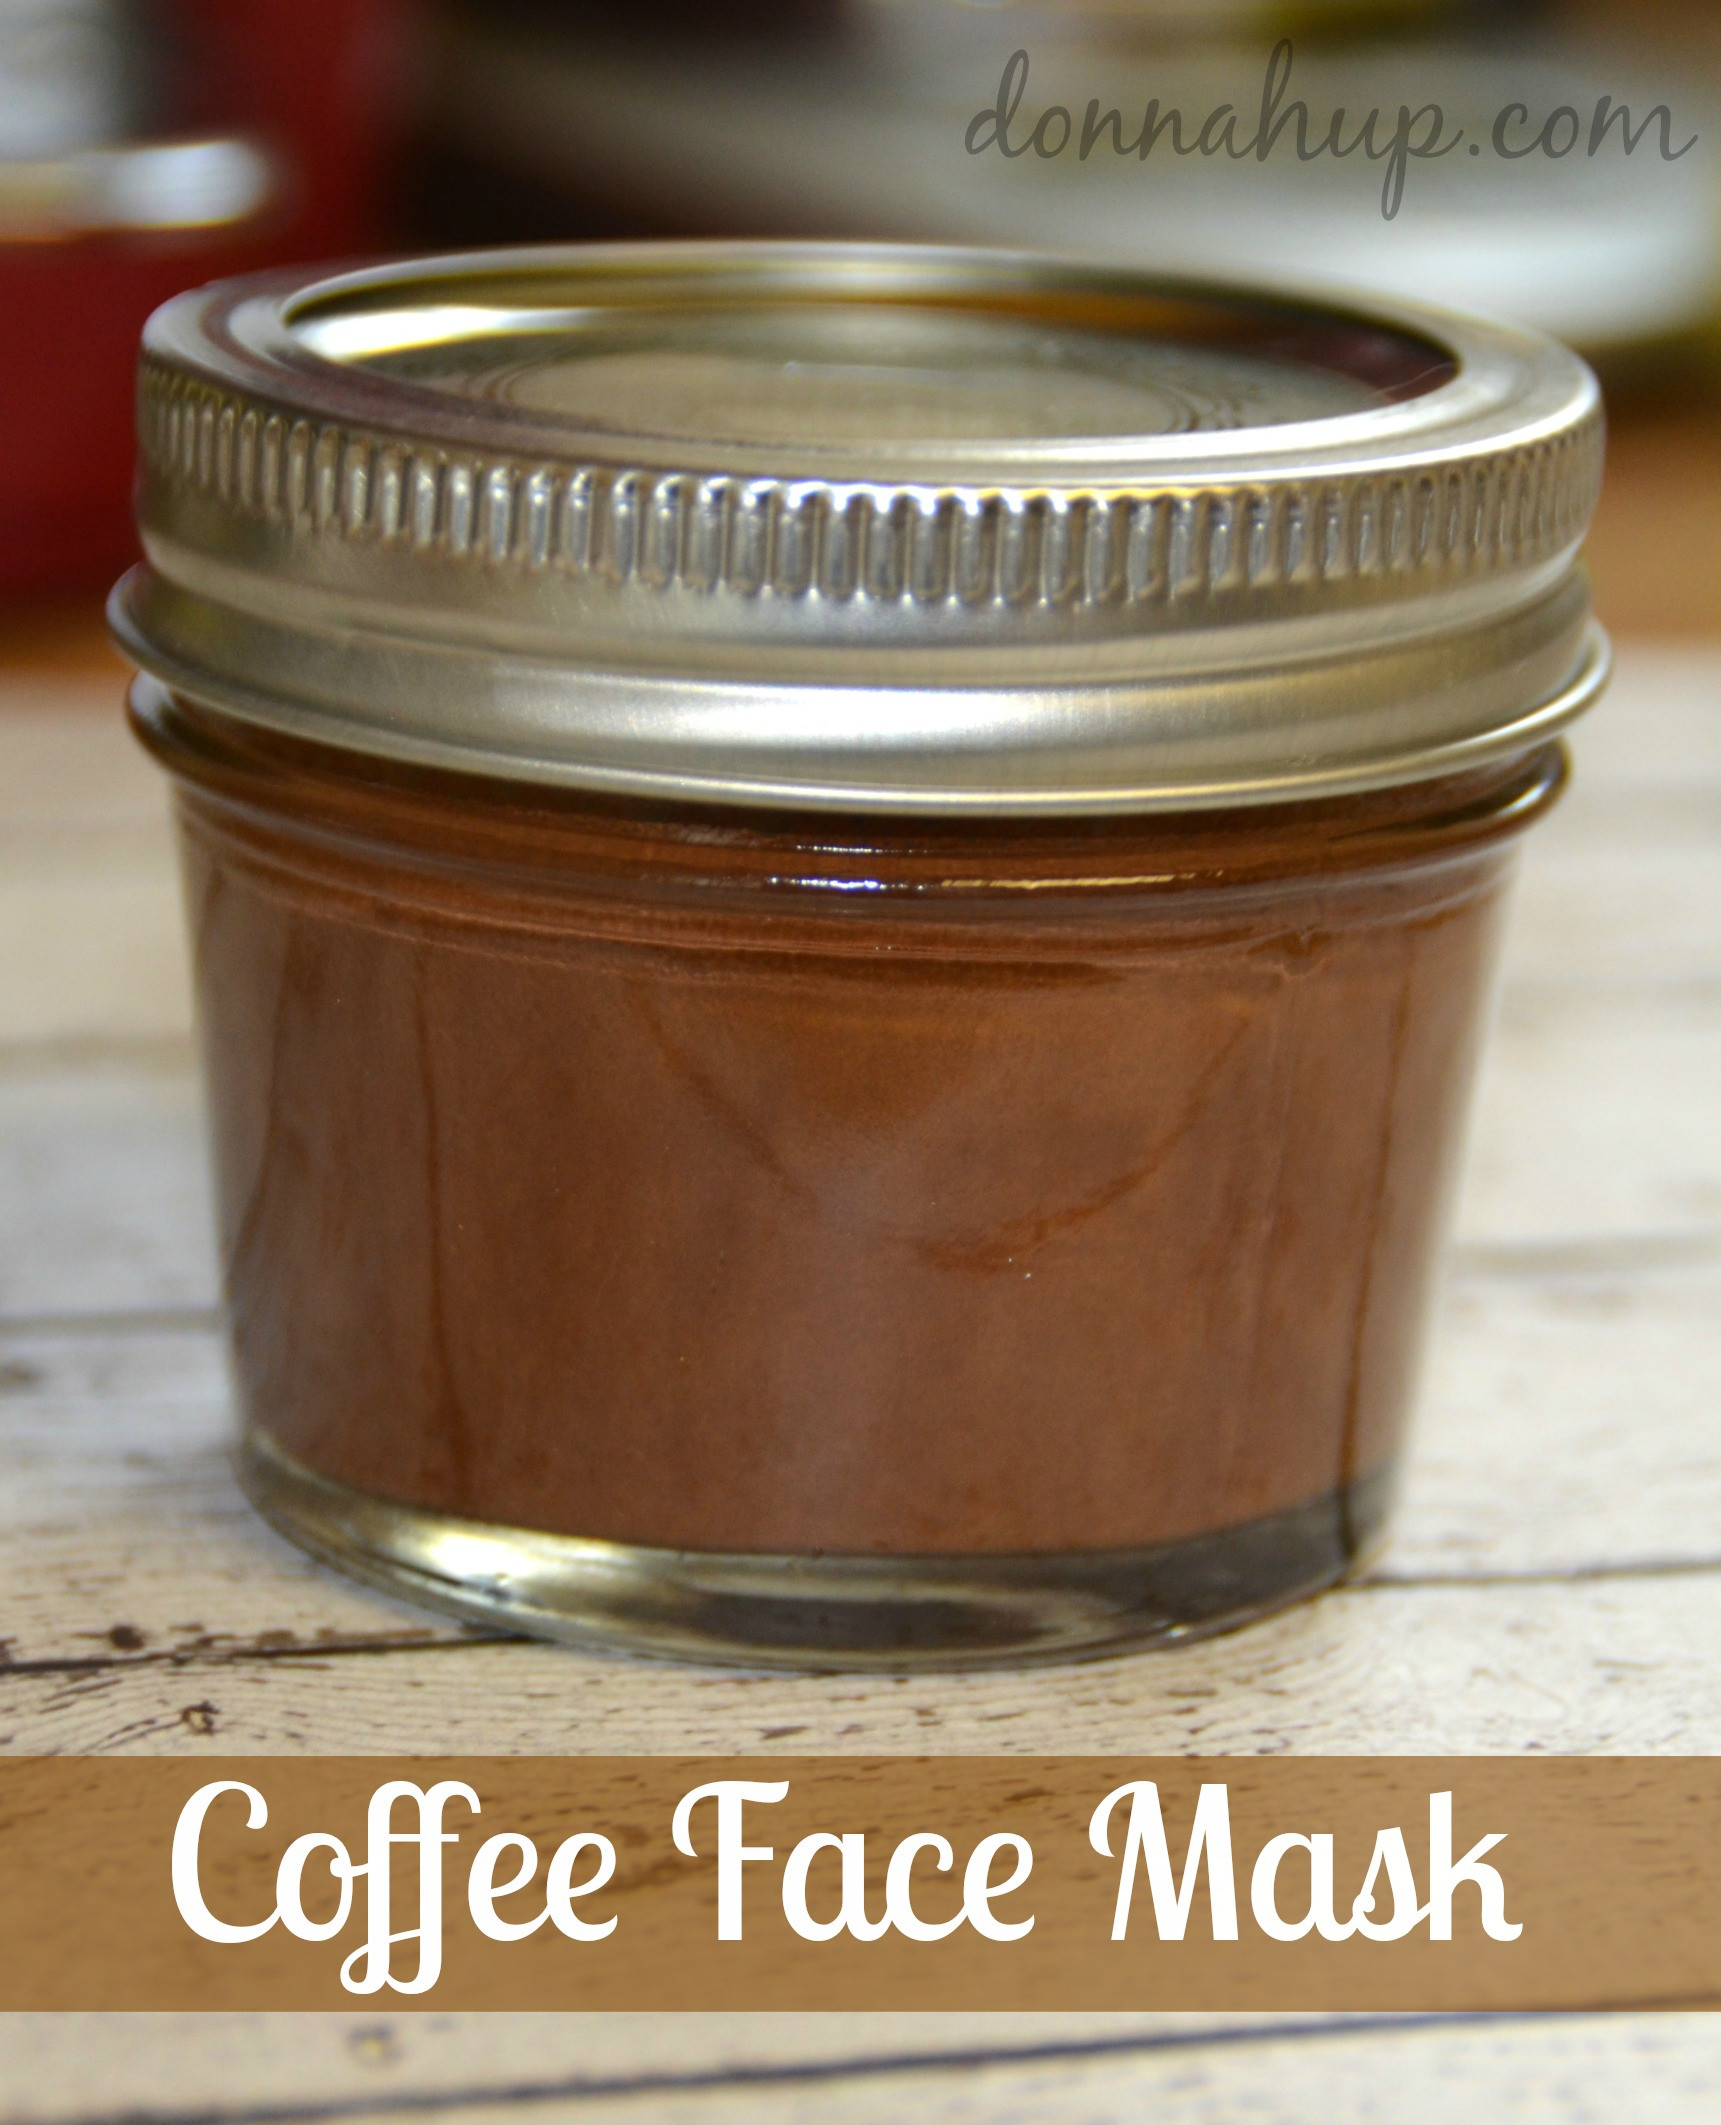 DIY Coffee Face Mask
 DIY Coffee Face Mask Recipe donnahup